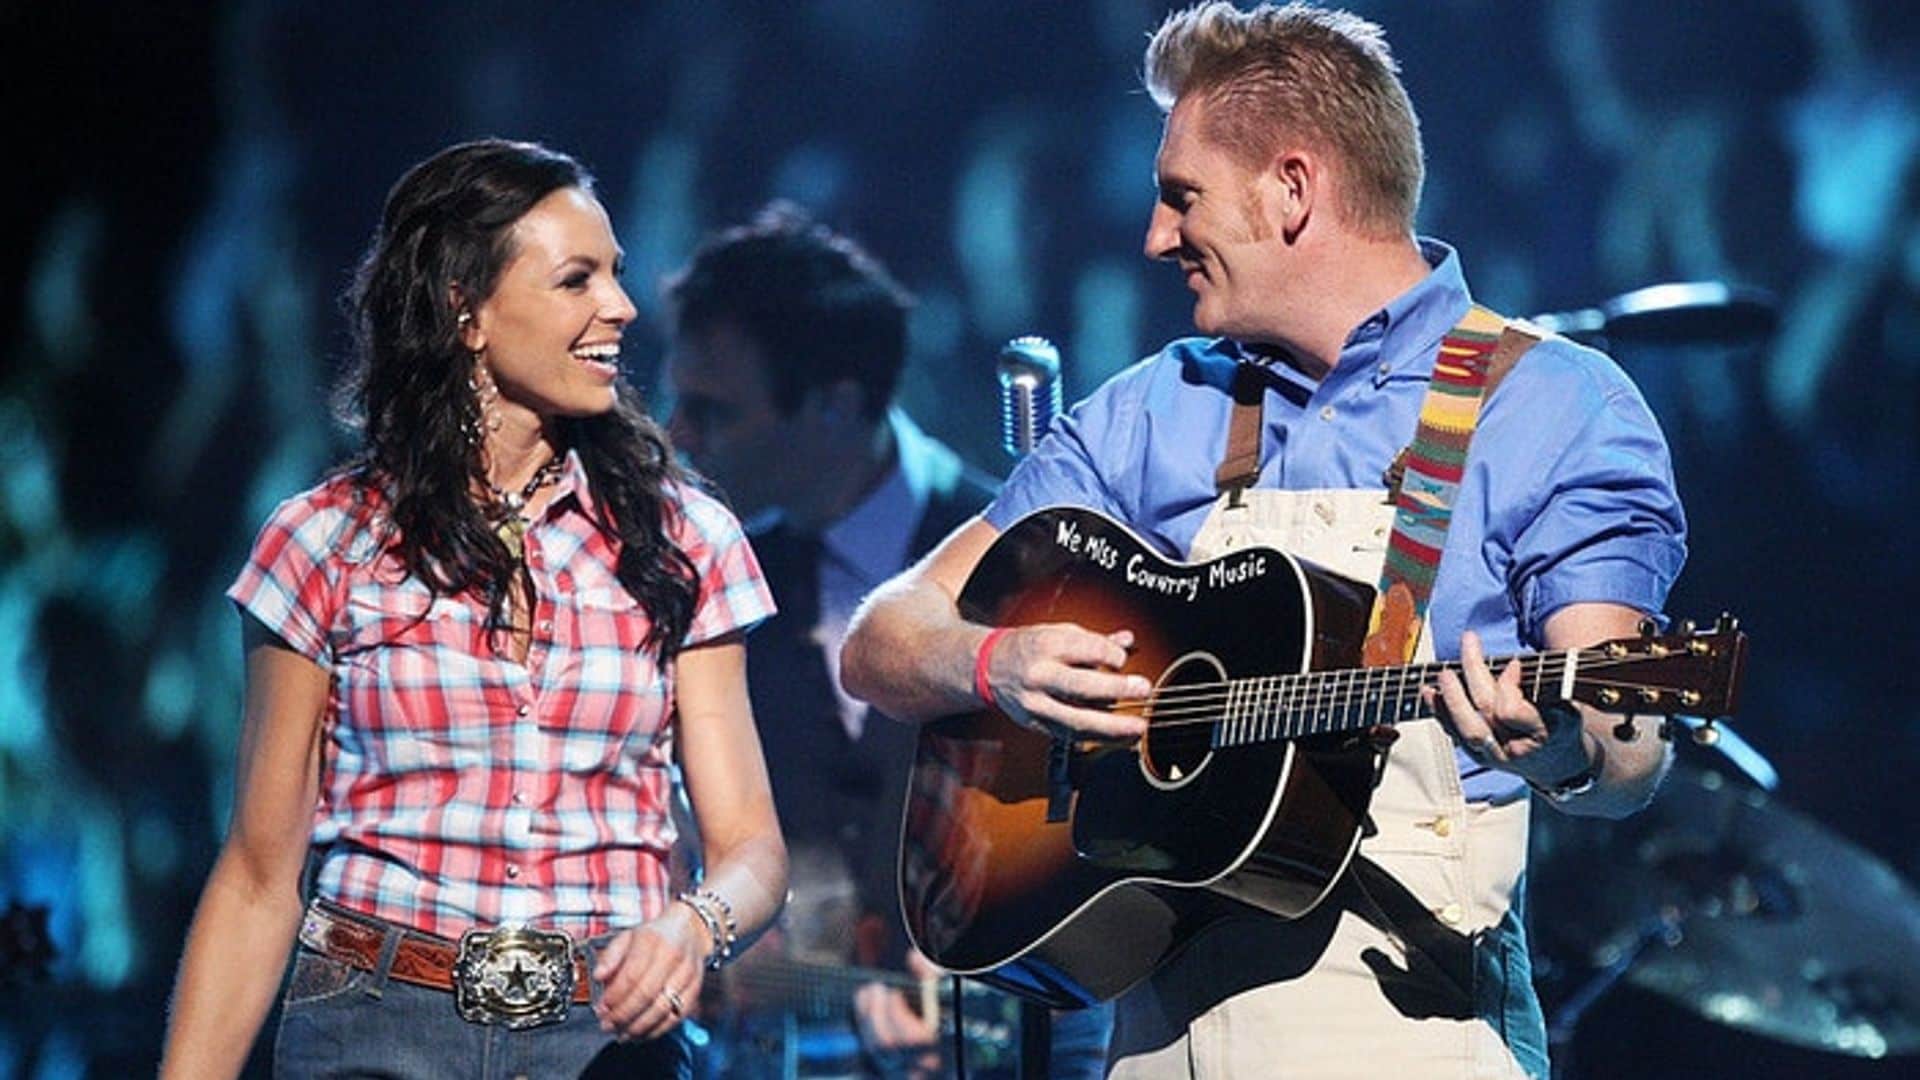 Joey Feek's Valentine's Day and Grammys were extra special thanks to husband Rory